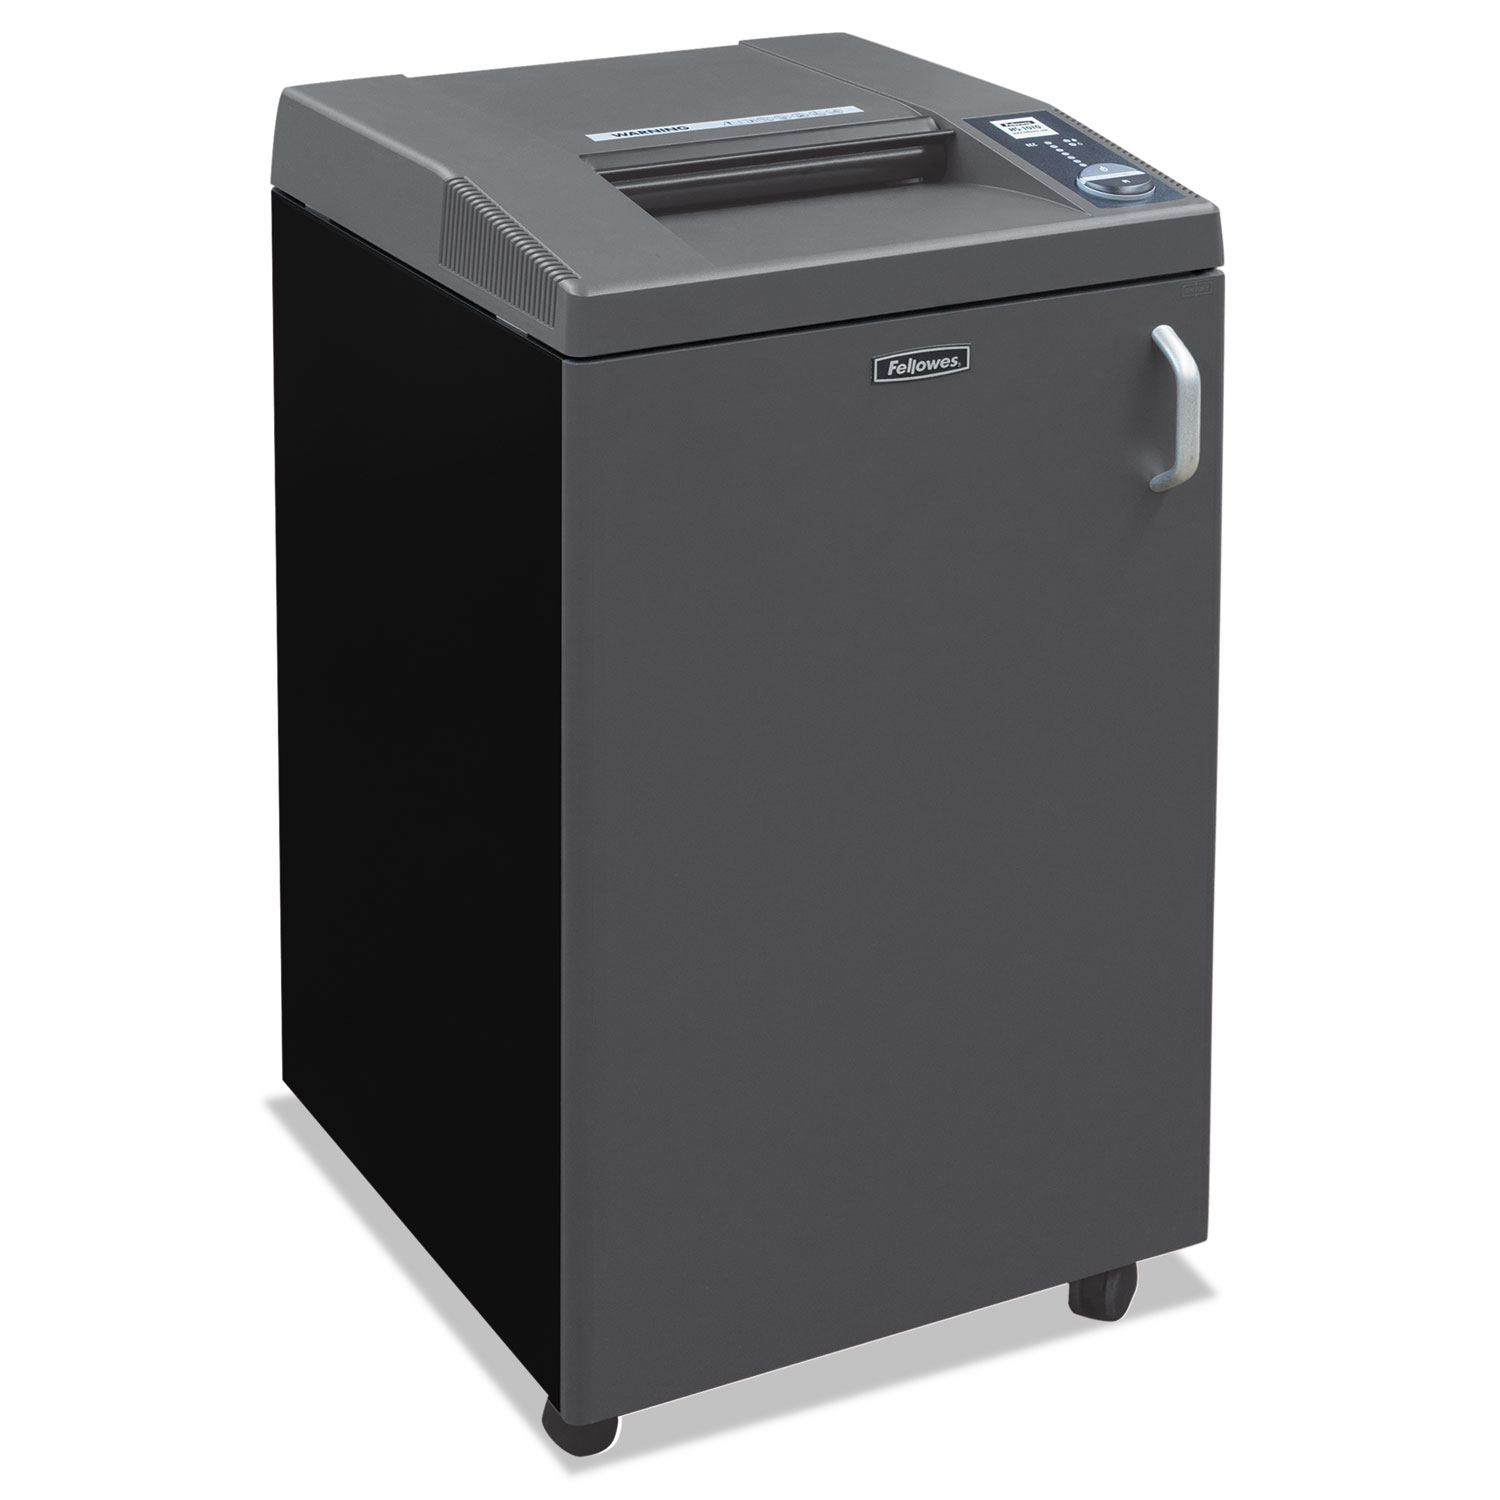 Fortishred HS-1010 TAA Compliant High Security Cross-Cut Shredder, 10 Sheets